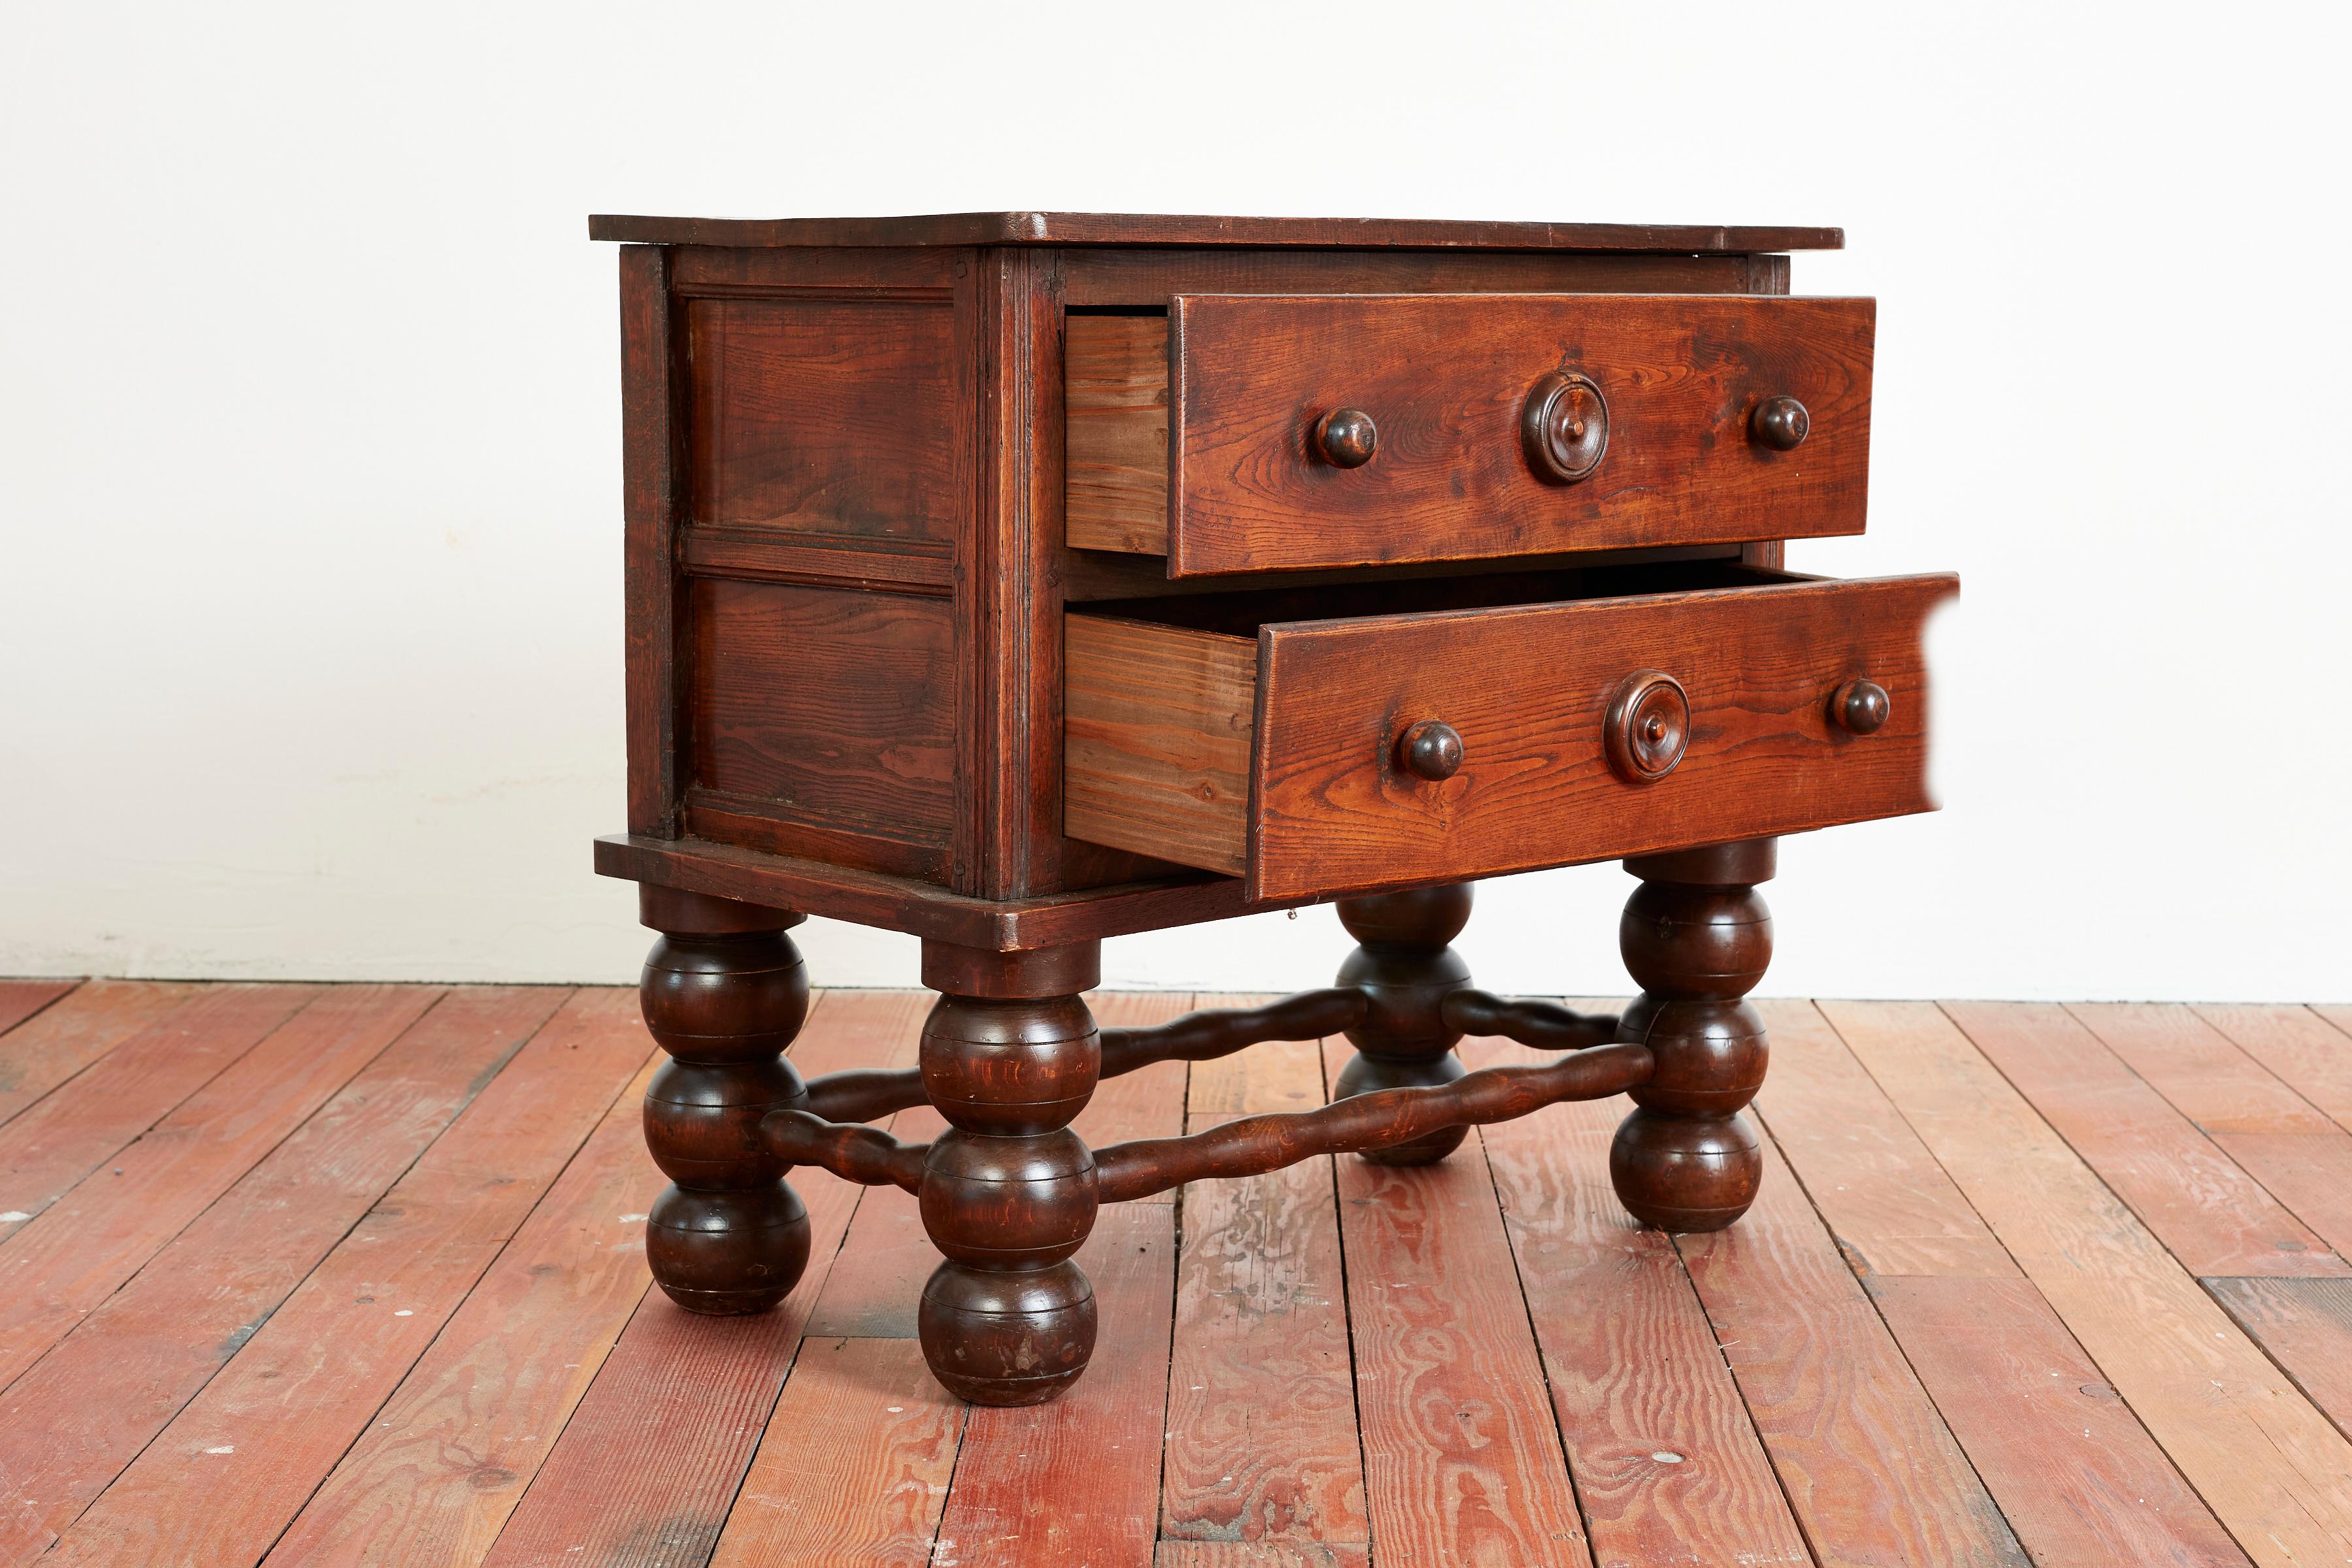 Rare Charles Dudouyt petite sized dresser with 2 drawers, signature bulbous legs and concentric carved circles. 

Rich oak patina with great scale.